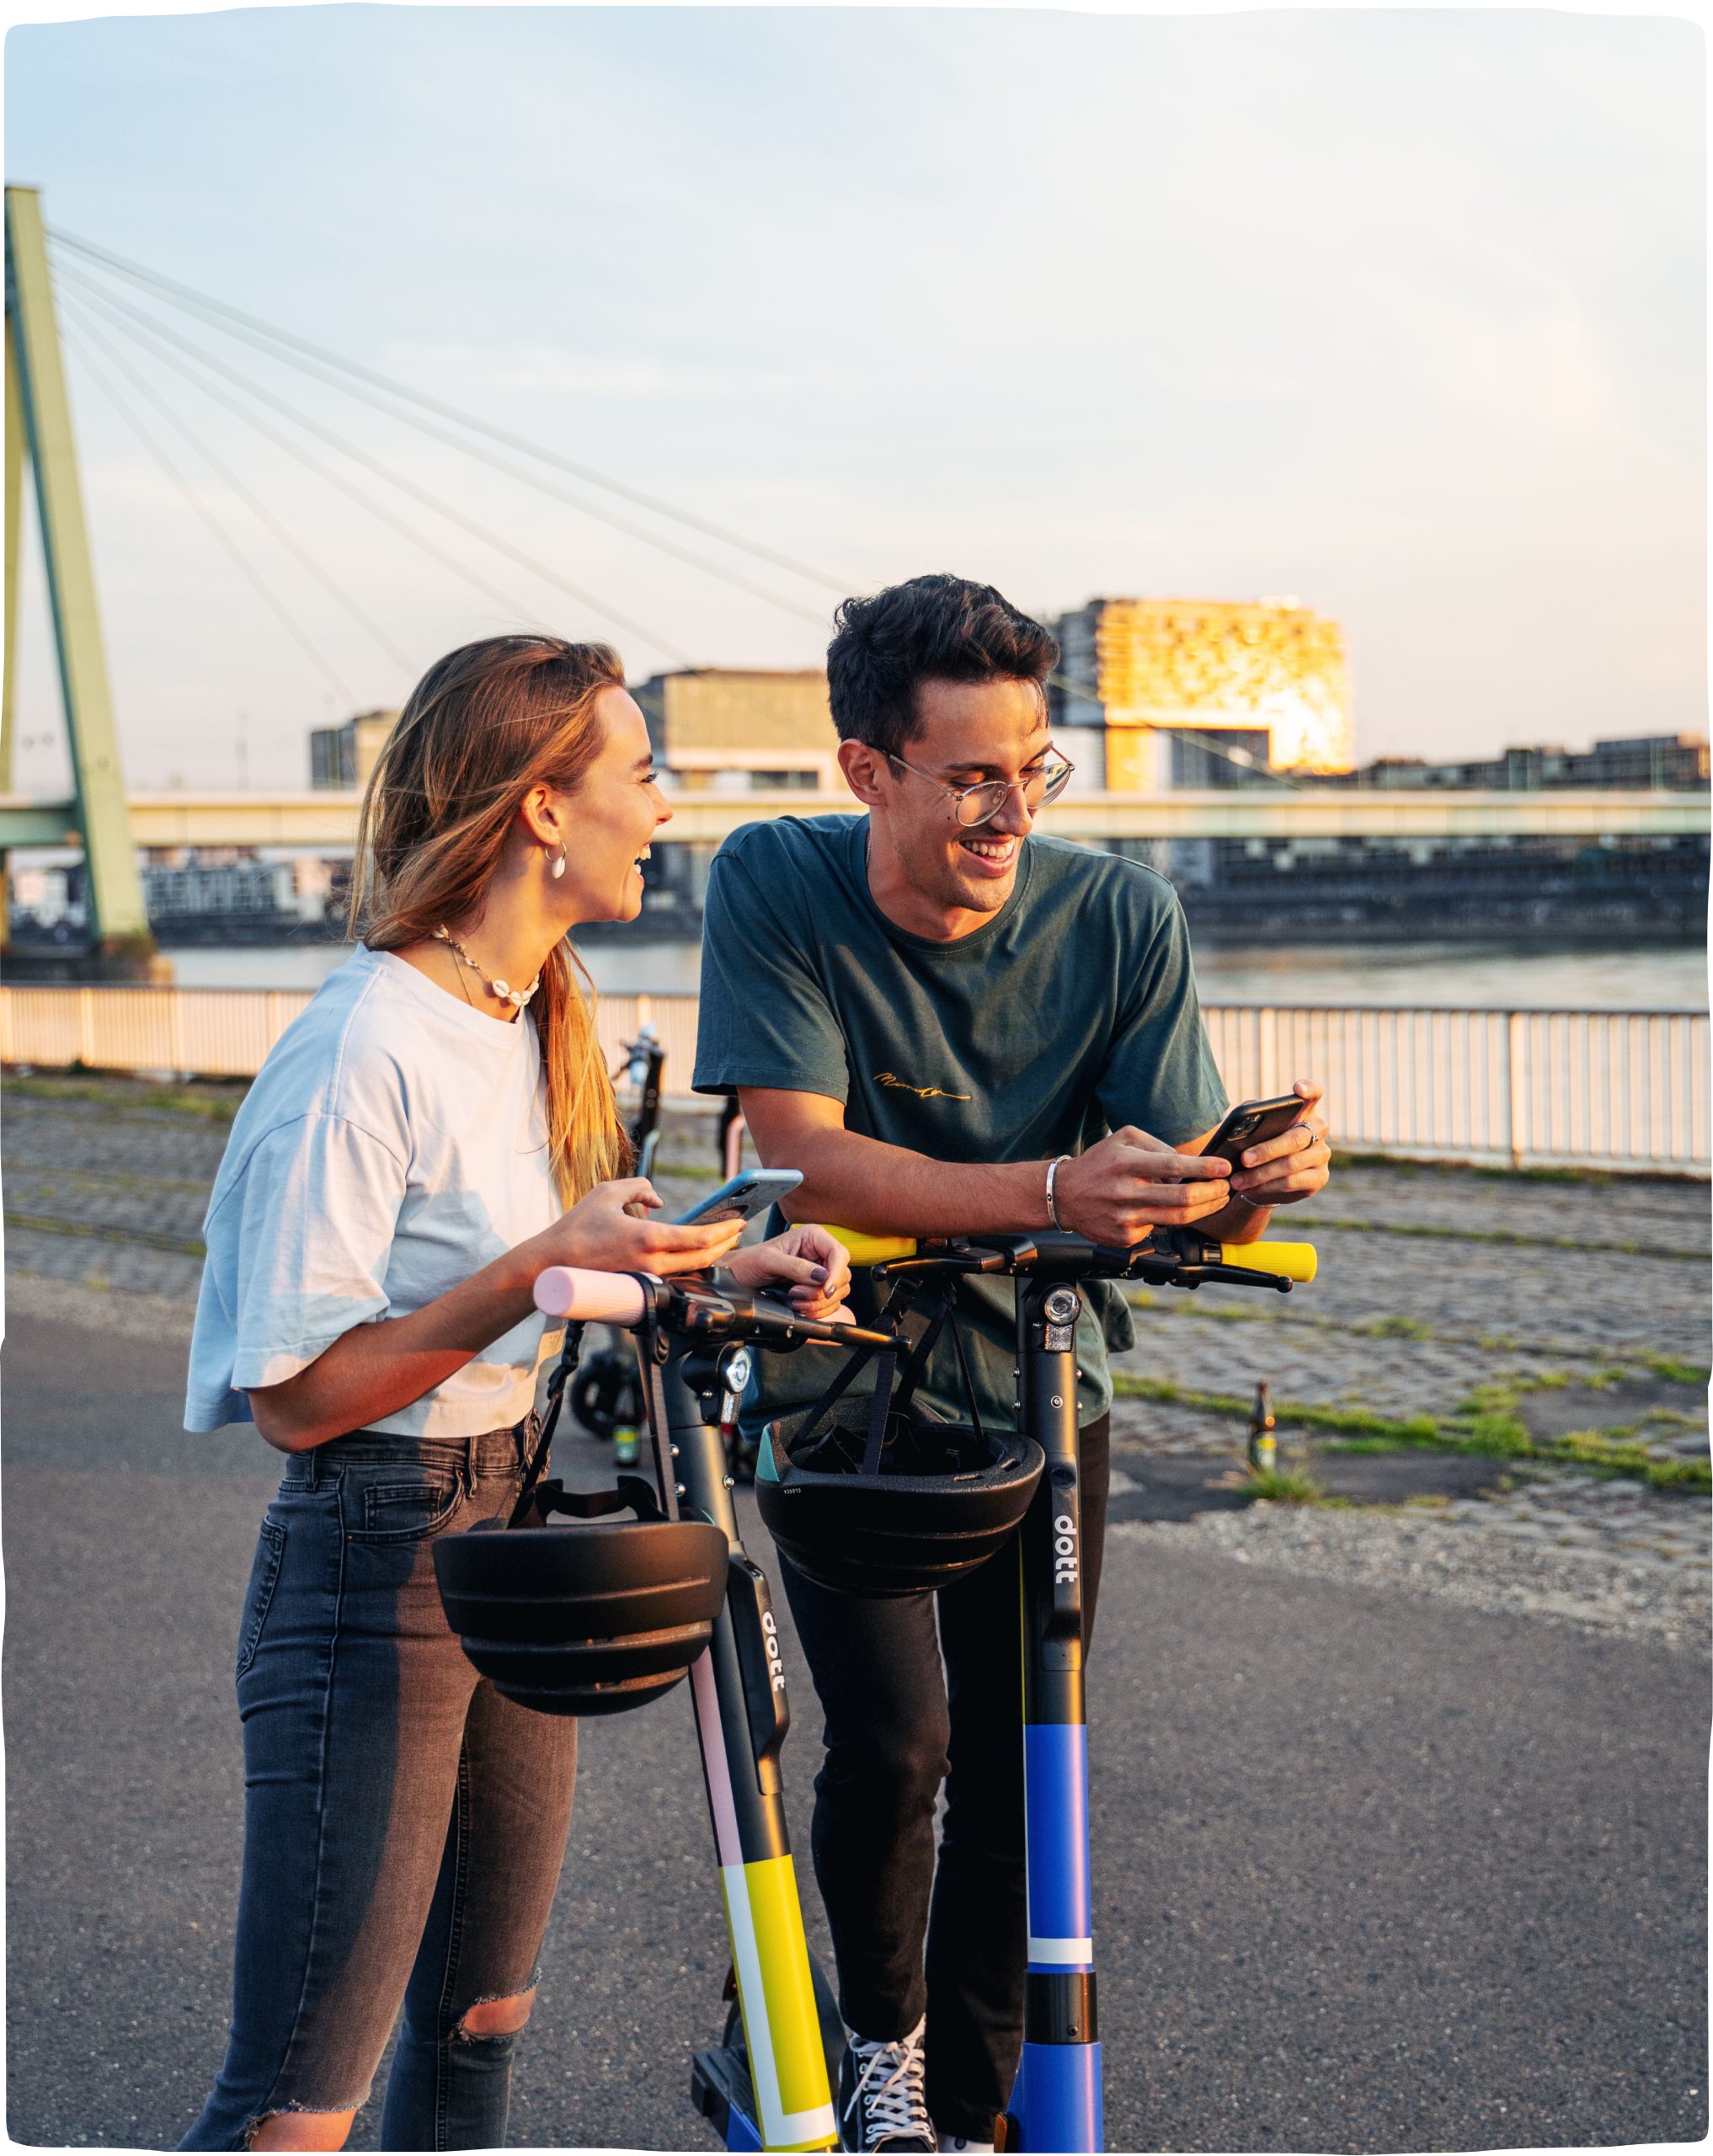 A woman and a man smiling and looking at their phones while they take a break from riding scooters, with a bridge and building in the sun behind.